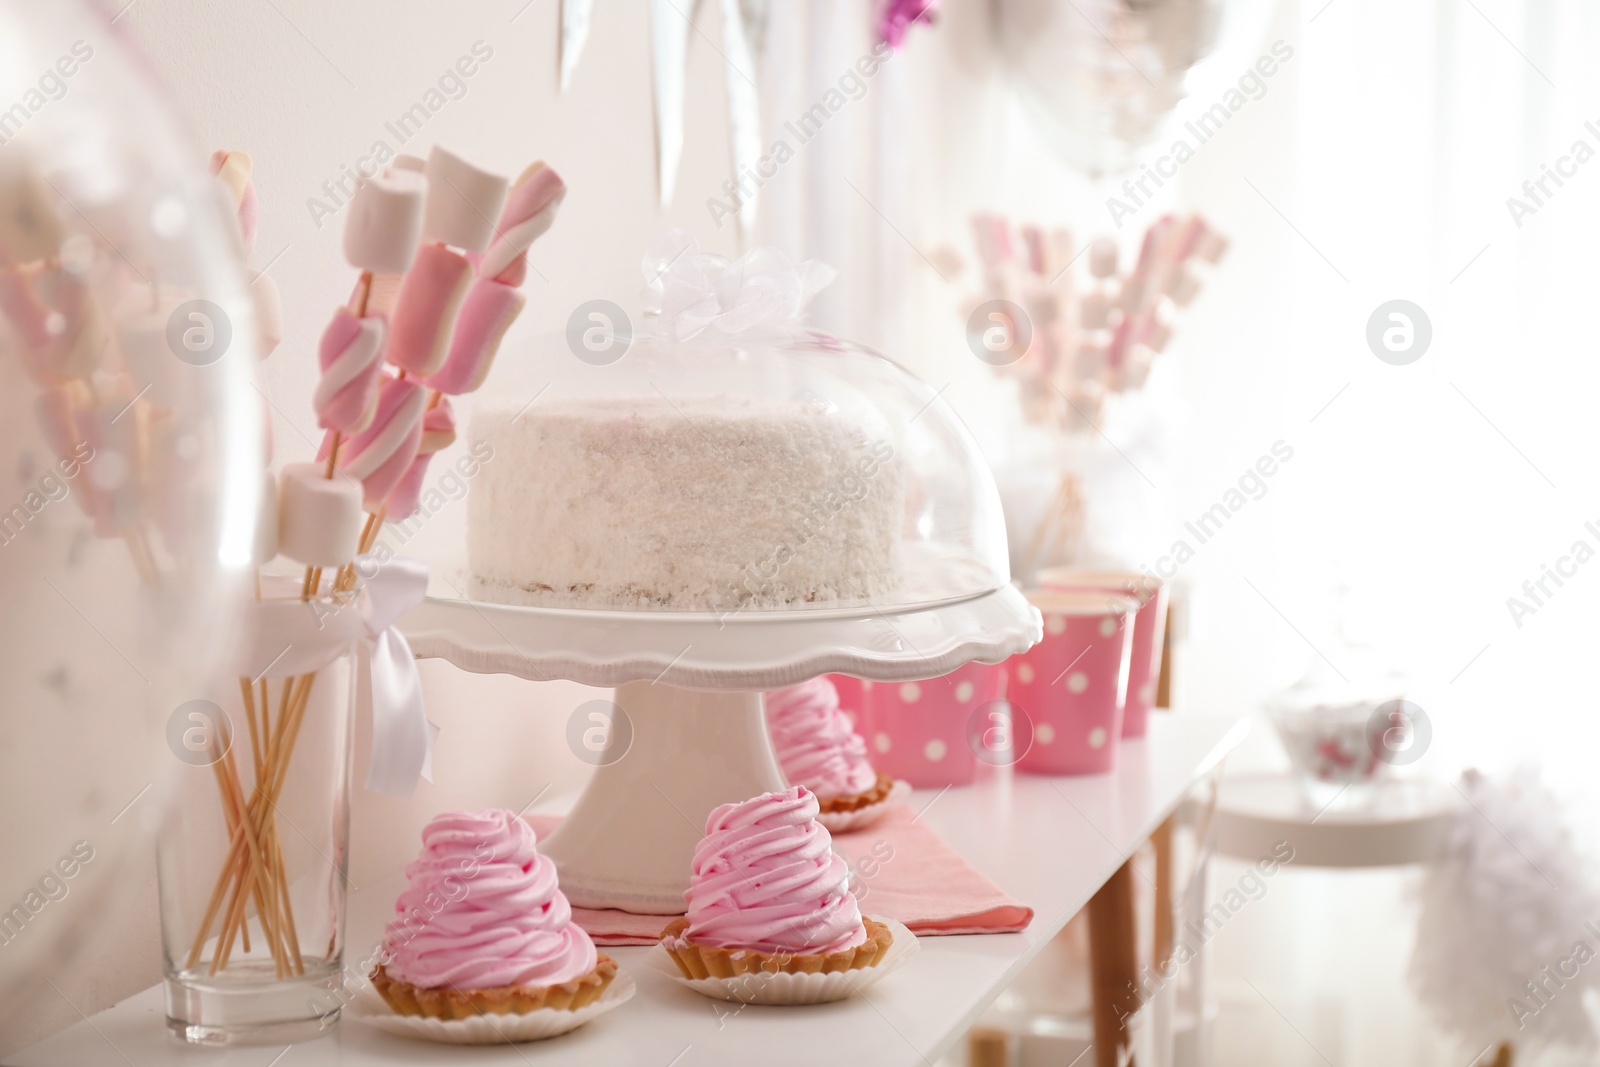 Photo of Tasty birthday cake and sweets on table indoors